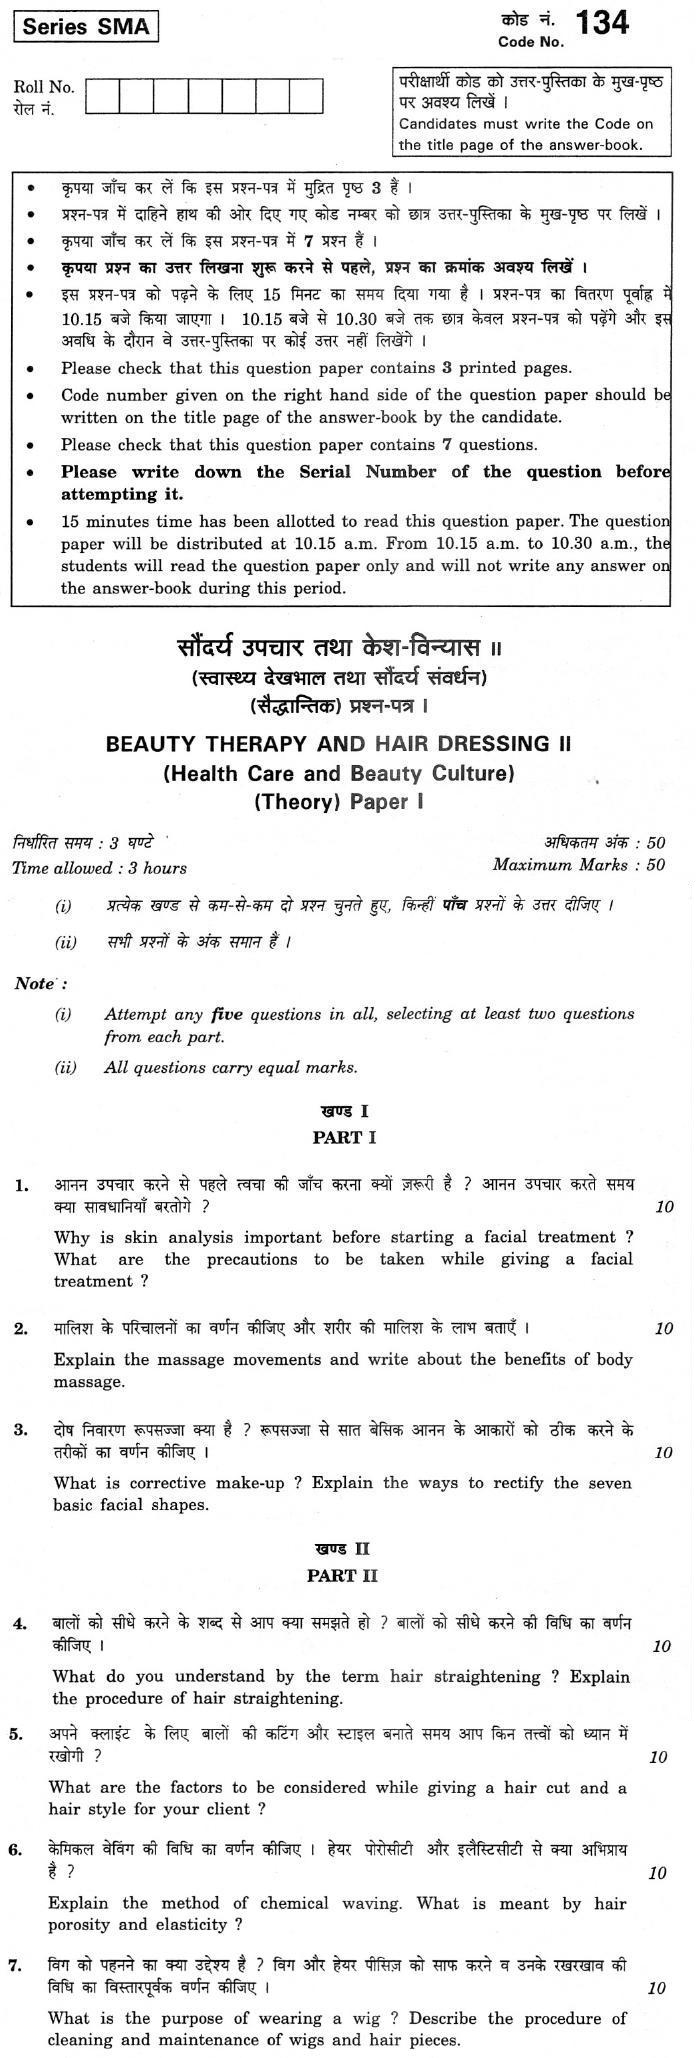 CBSE Class XII Previous Year Question Paper 2012 Beauty Therapy and Hair Derssing II